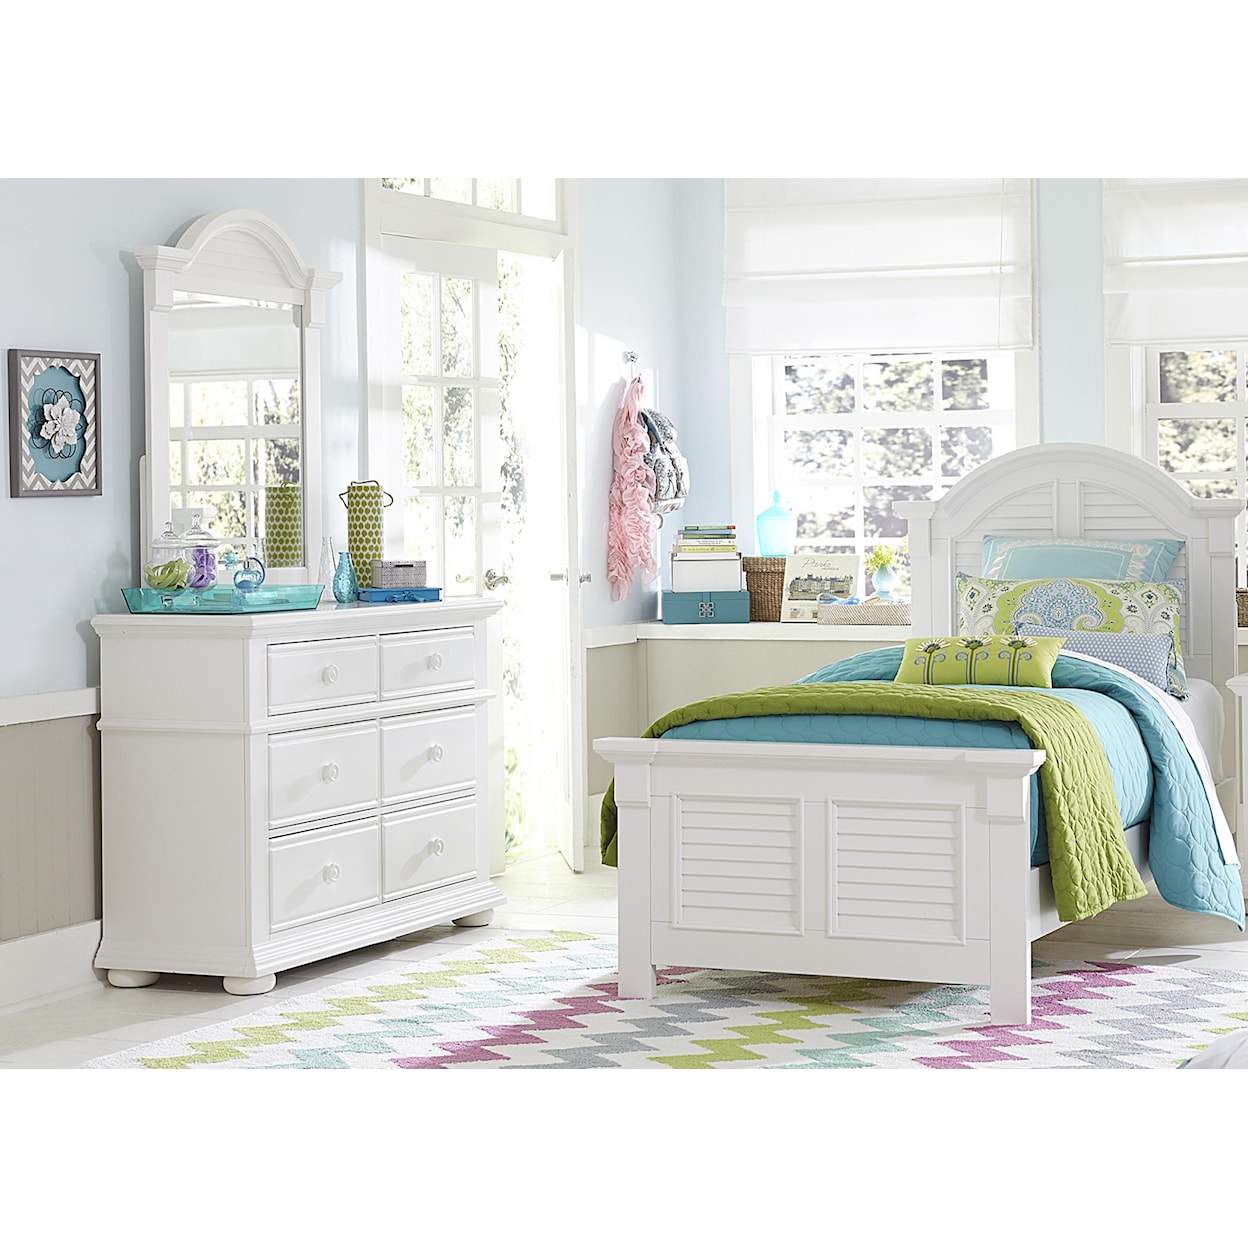 Liberty Furniture Summer House Twin Bedroom Group